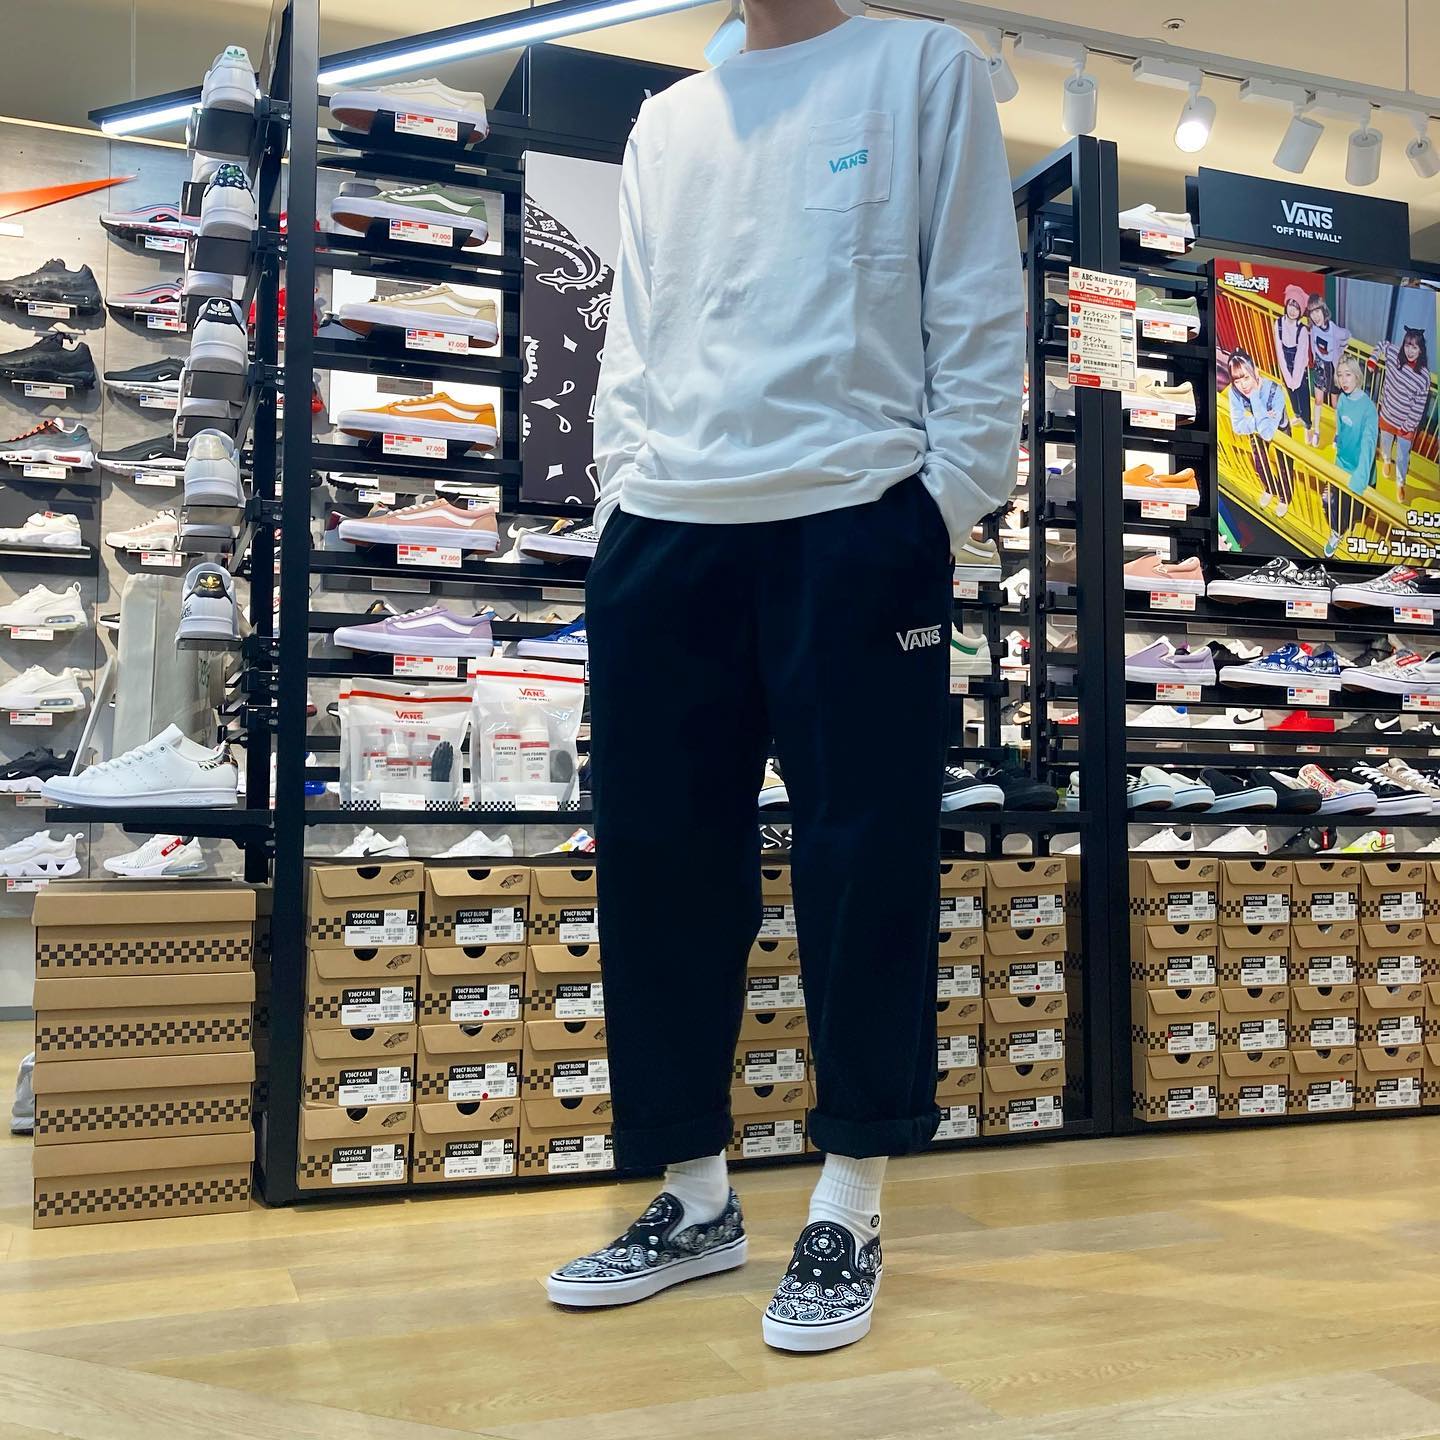 .<br>
こんにちは！🌞<br>
ABC-MART SPORTS熊本鶴屋NEW-S店です！<br>
.<br>
.<br>
本日はVANSウェアのご紹介です！‍♂️🛹<br>
.<br>
.<br>
(トップス)<br>
M VANS STANDARD L/S TEE<br>
WHITE<br>
¥5,500 tax in<br>
.<br>
(ボトムス)<br>
M VANS CHECKER PANTS<br>
BLACK<br>
¥8,250 tax in<br>
.<br>
(シューズ)<br>
Classic Slip-On<br>
BANDANA BLK/WHT<br>
¥6,600 tax in<br>
.<br>
.<br>
是非店頭にてお試しください！<br>
.